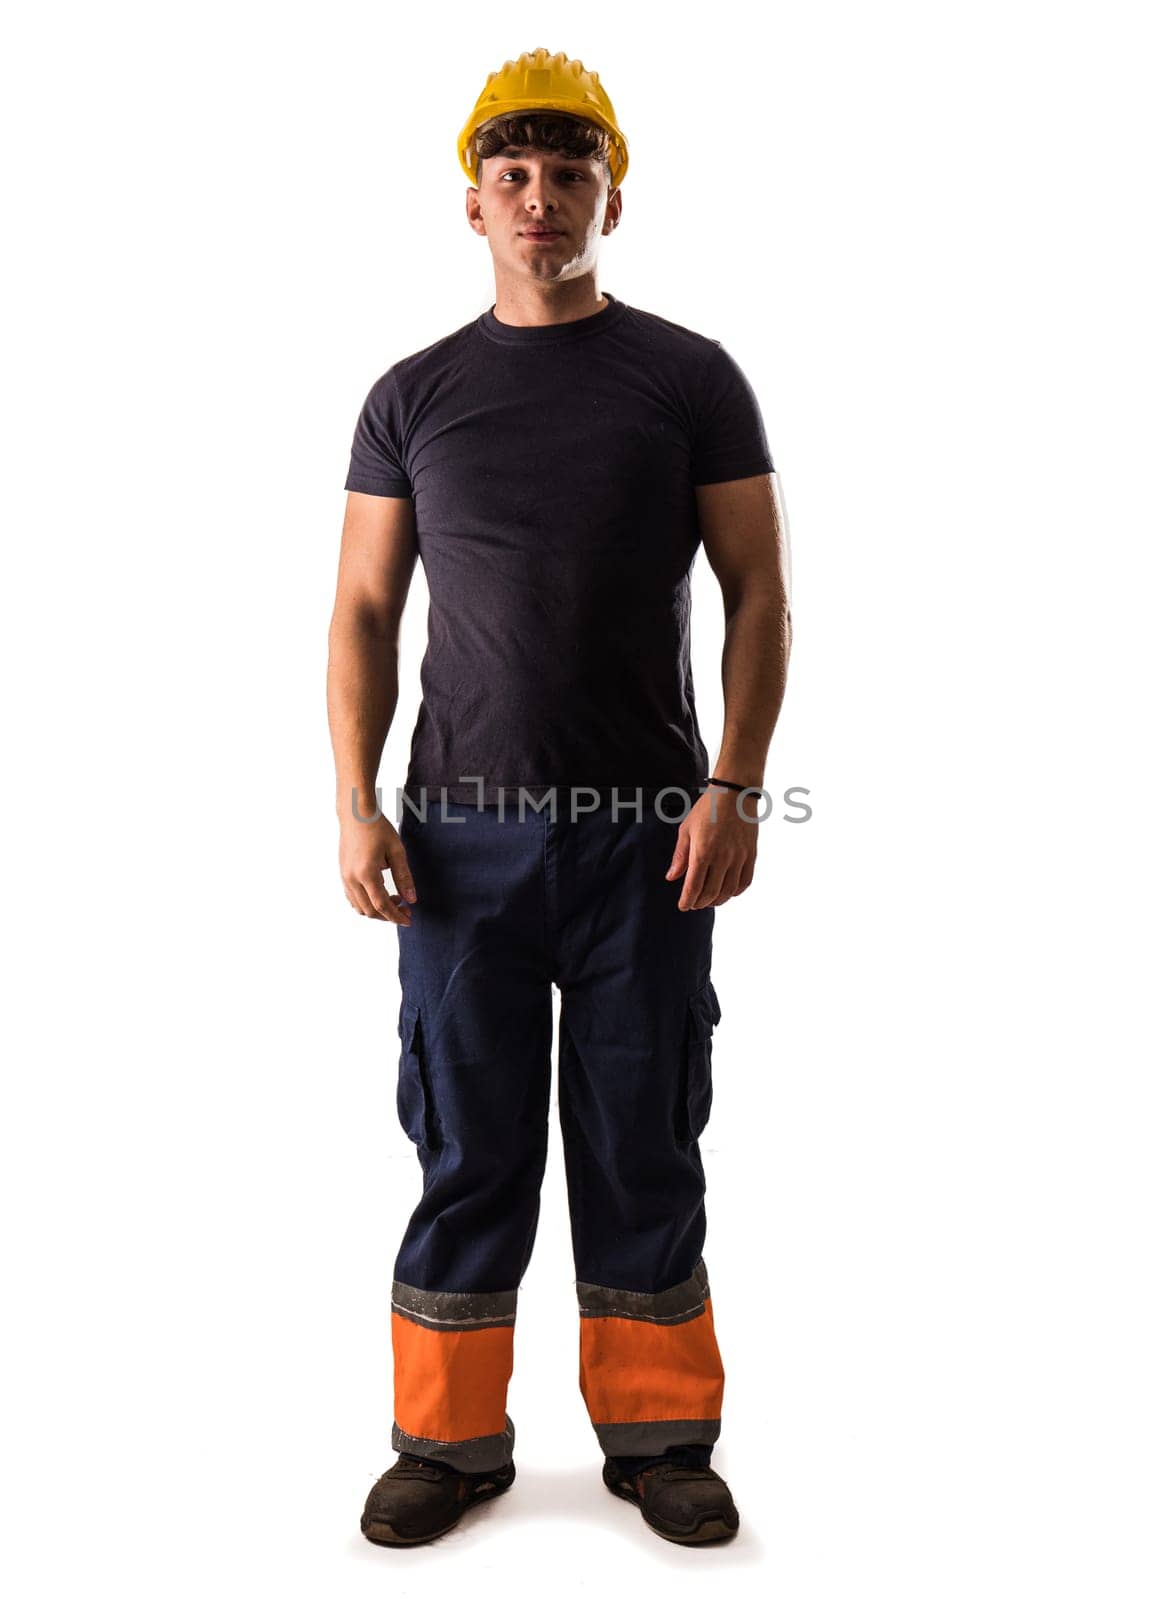 A young man wearing a hard hat and overalls, isolated on white in studio shot. Full length